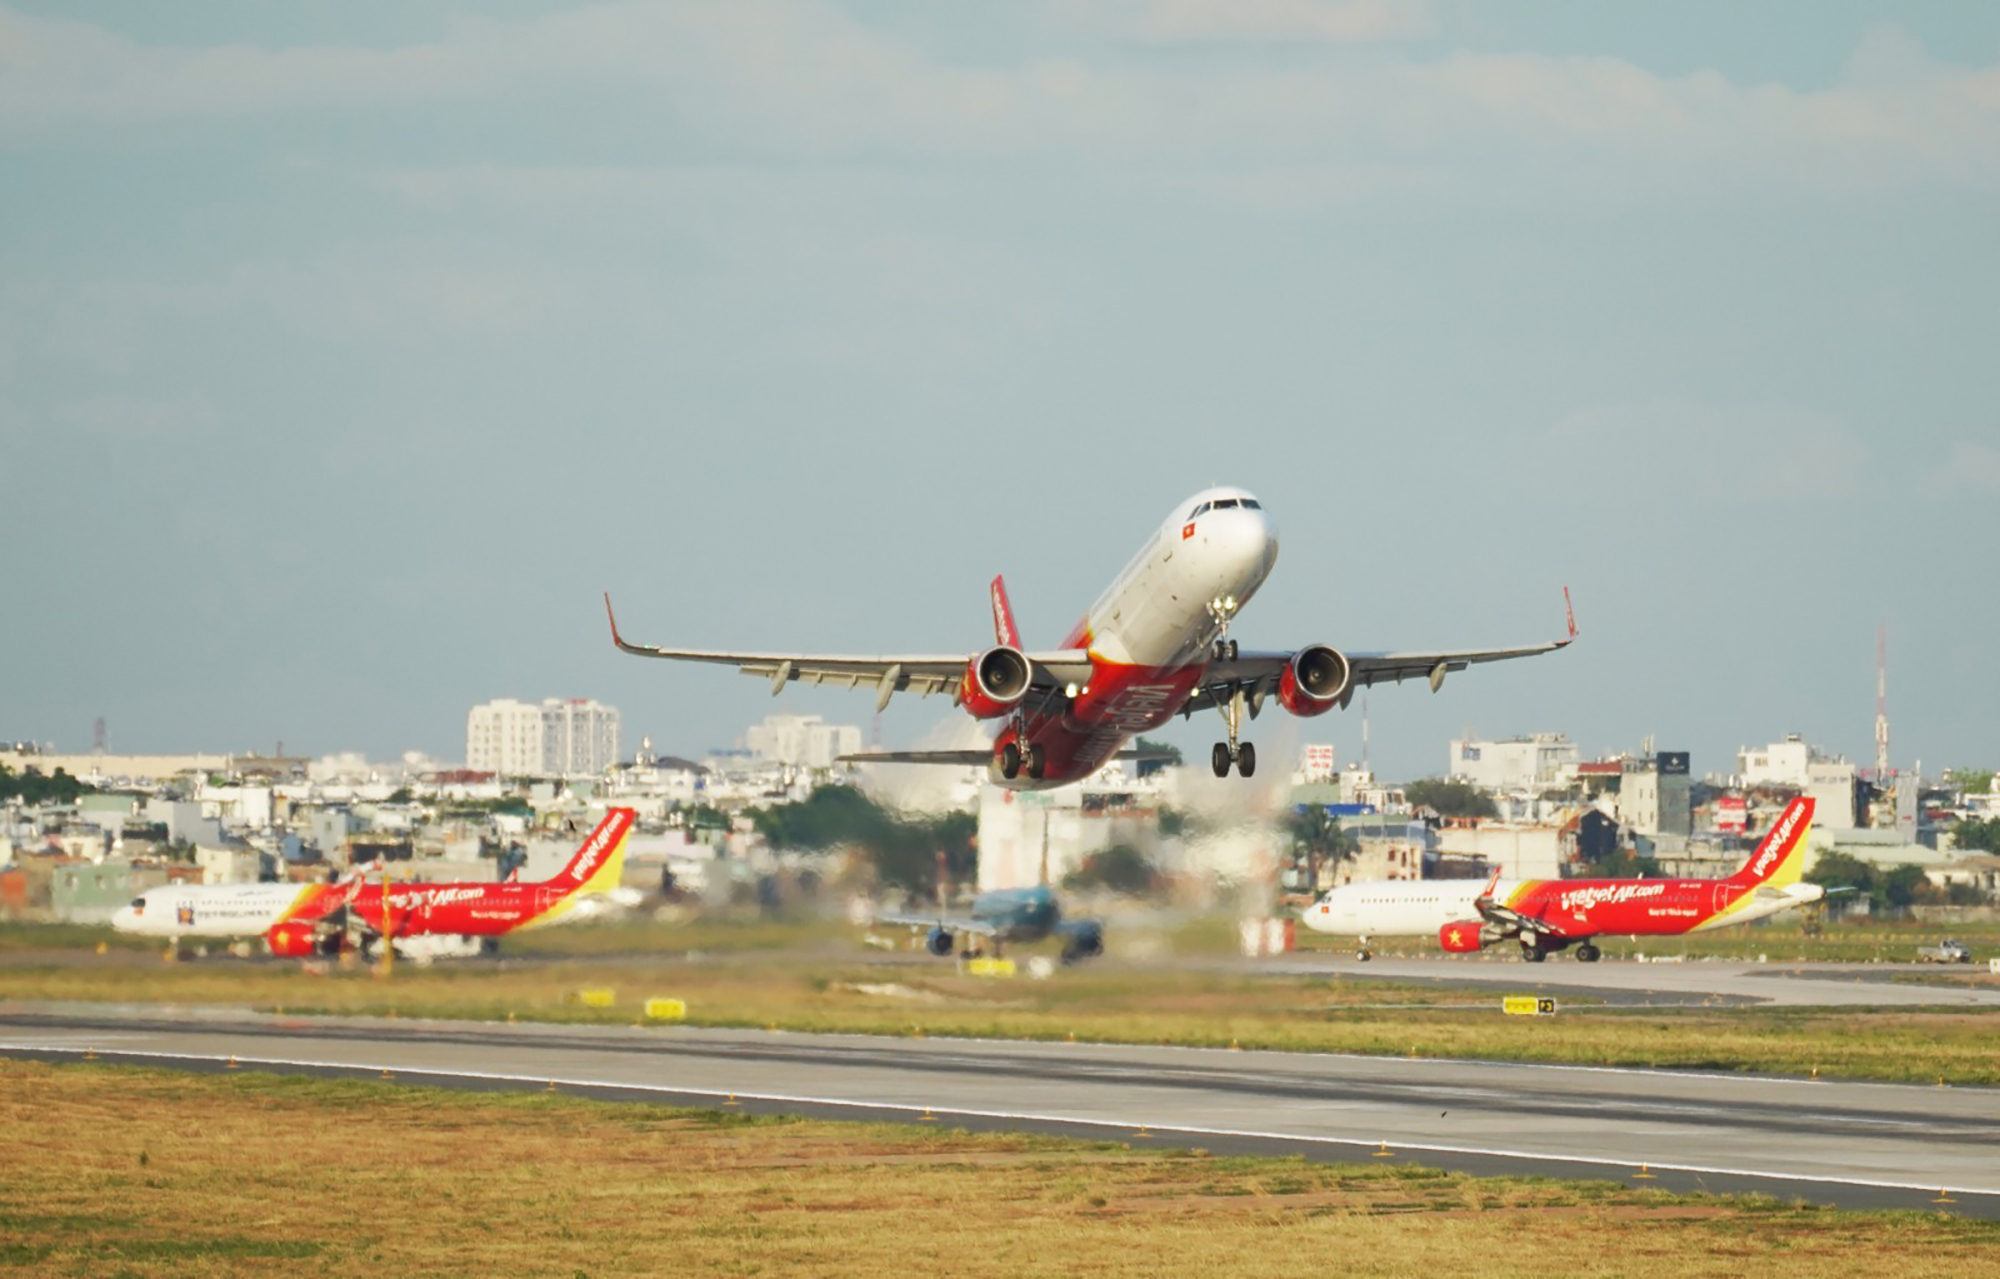 Vietjet’s air transport revenue in Q2 2022 increases by 15%